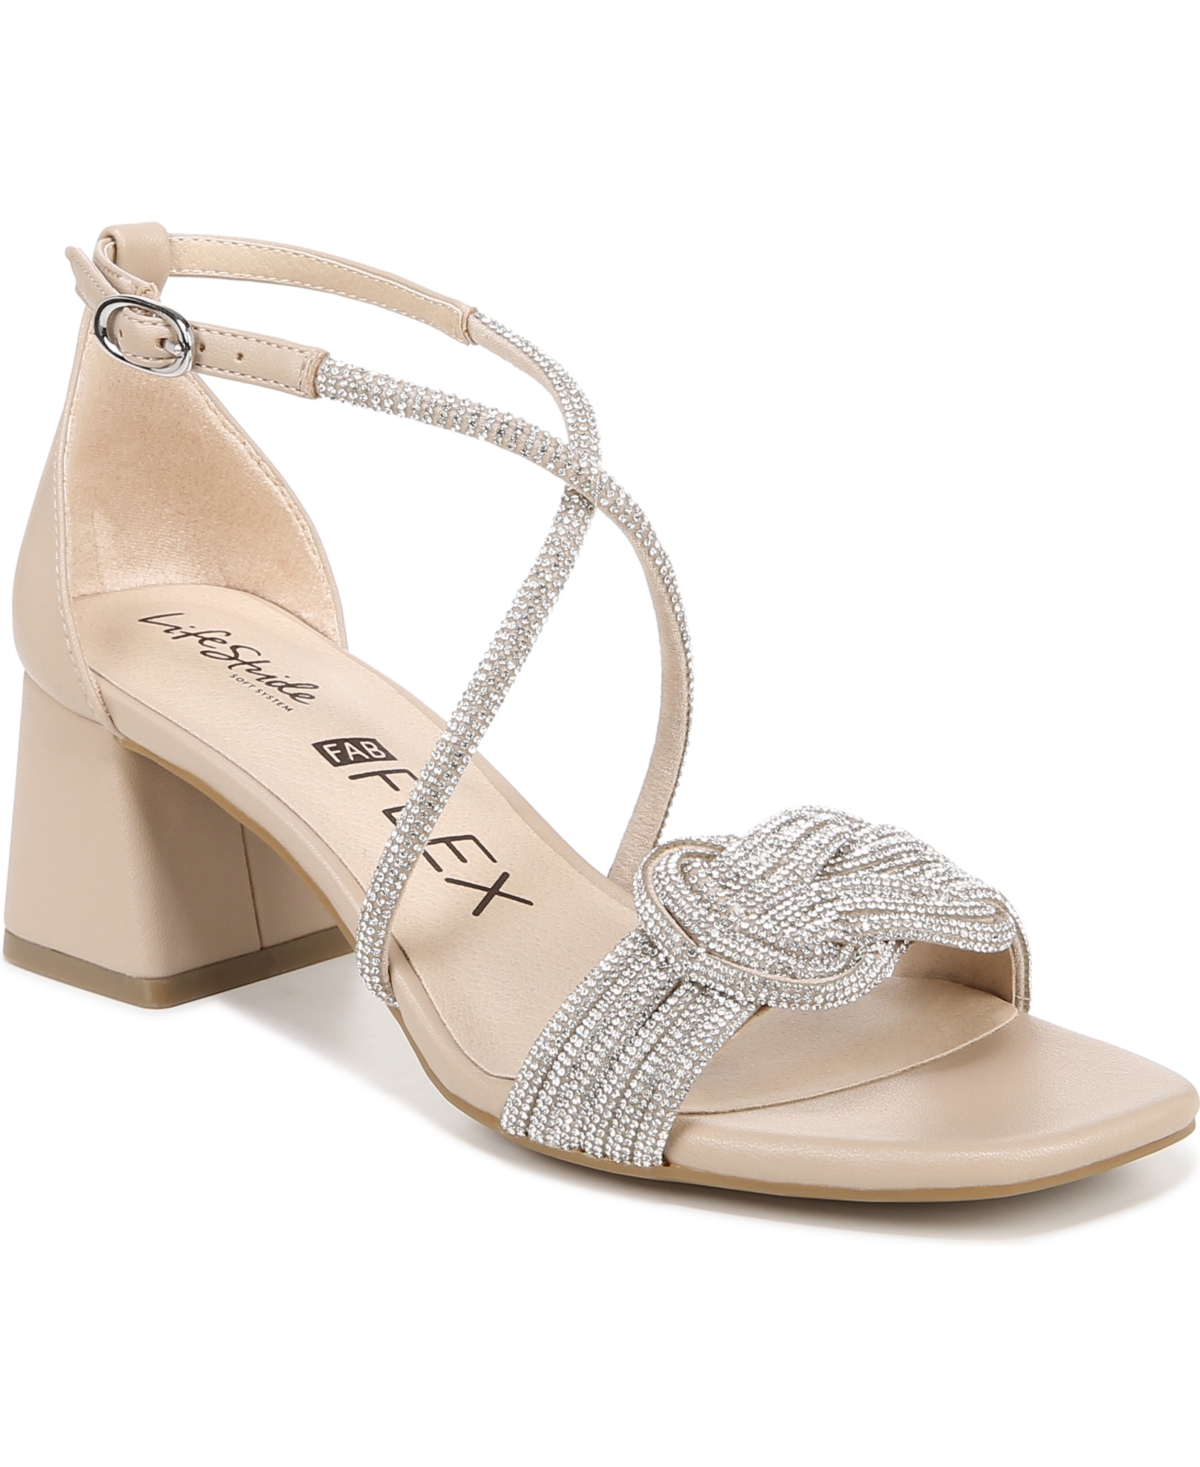 Captivate Strappy Sandals - Tender Taupe Beige Faux Leather